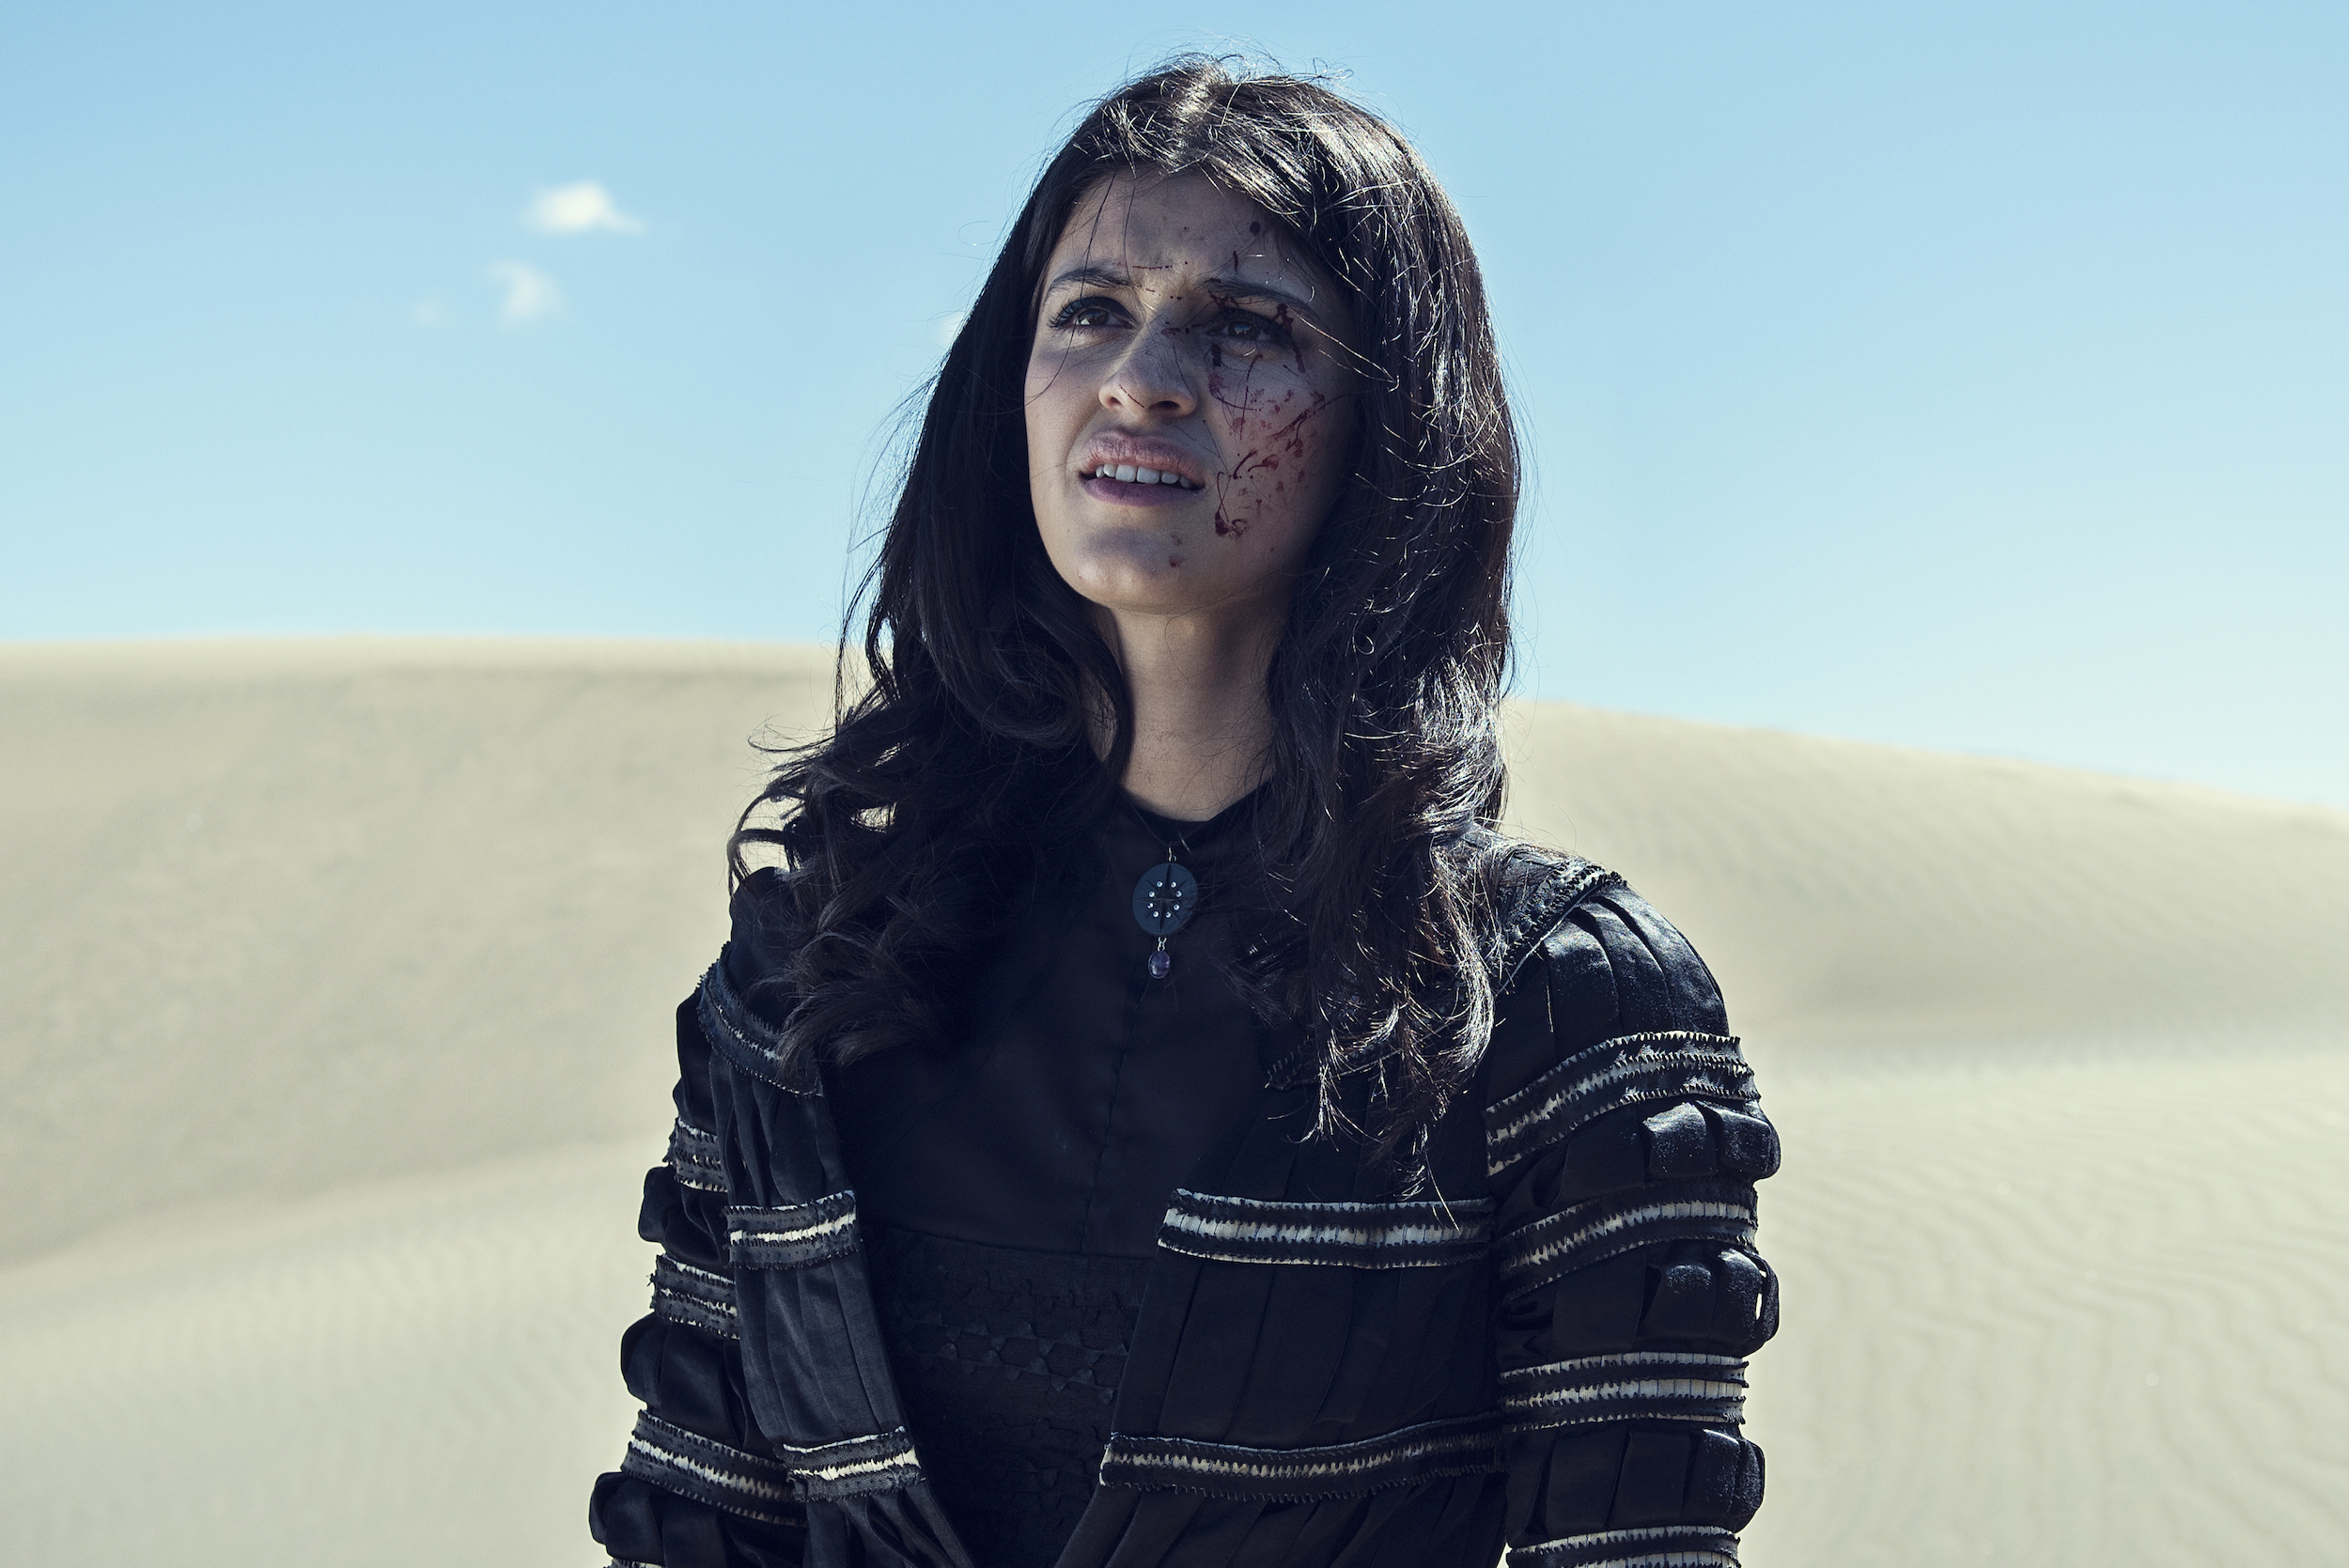 Yennefer stands in a desert, splattered with blood, in The Witcher